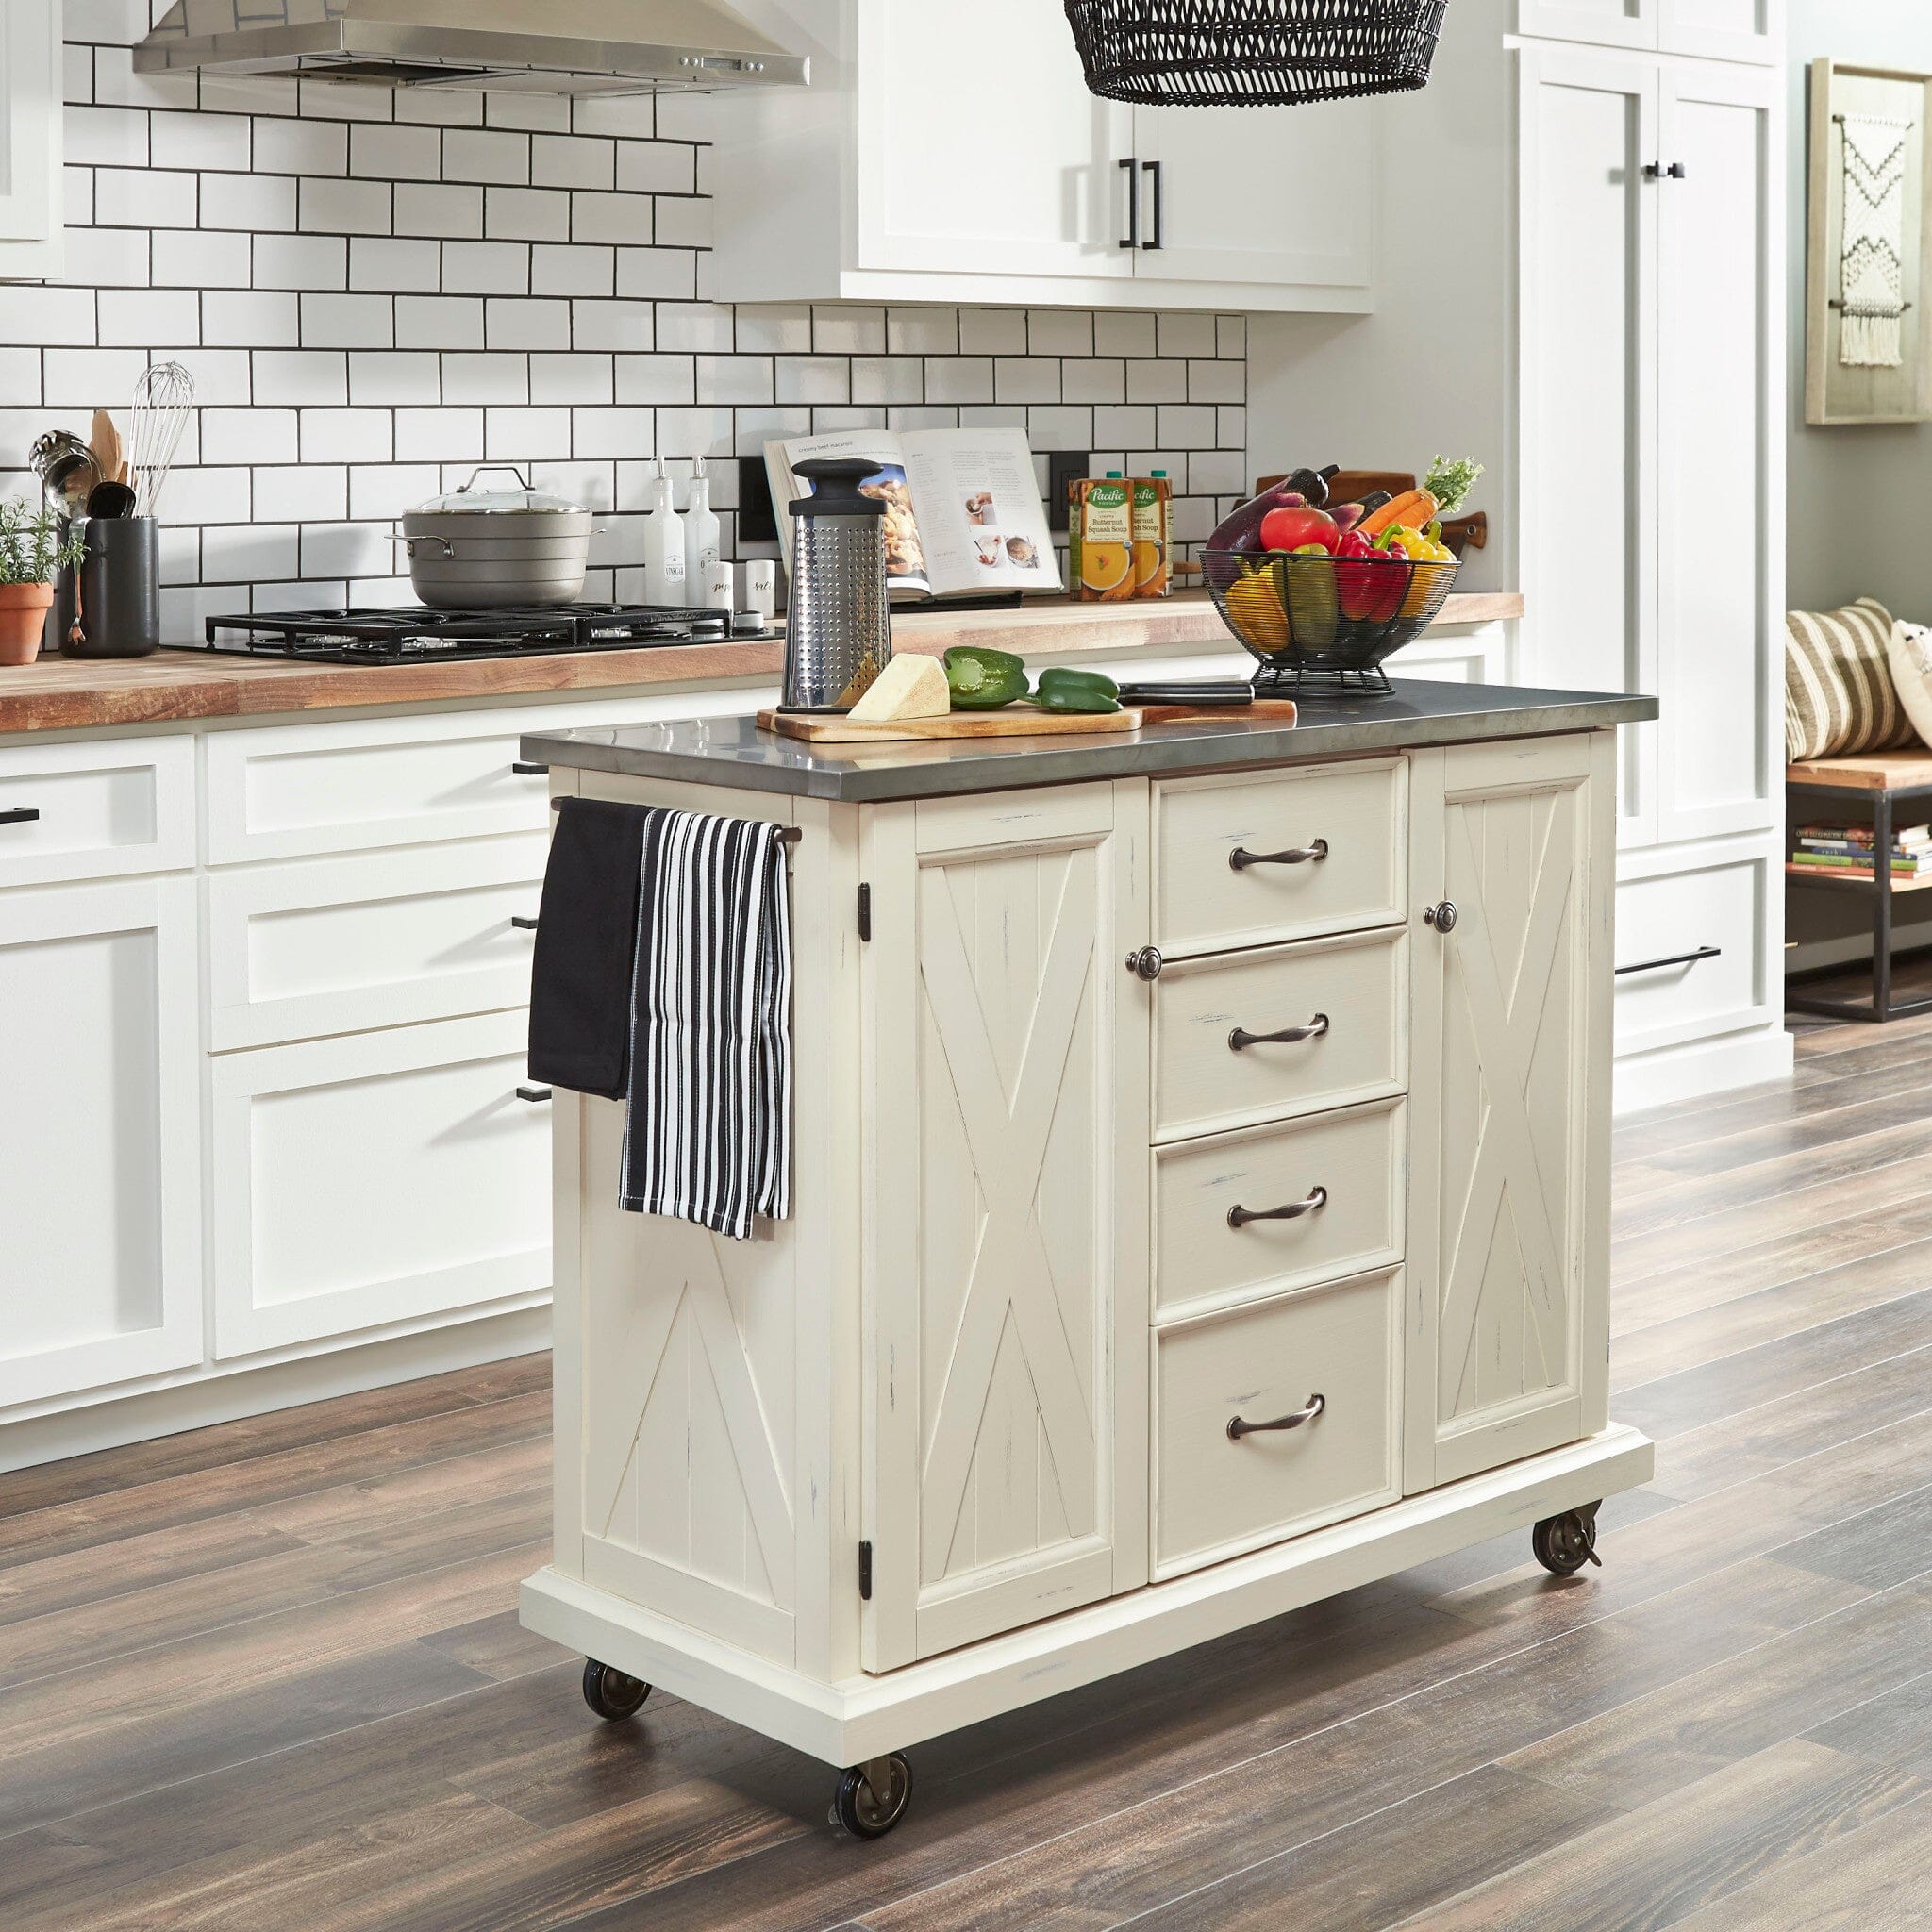 Traditional Kitchen Cart By Seaside Lodge Kitchen Cart Seaside Lodge